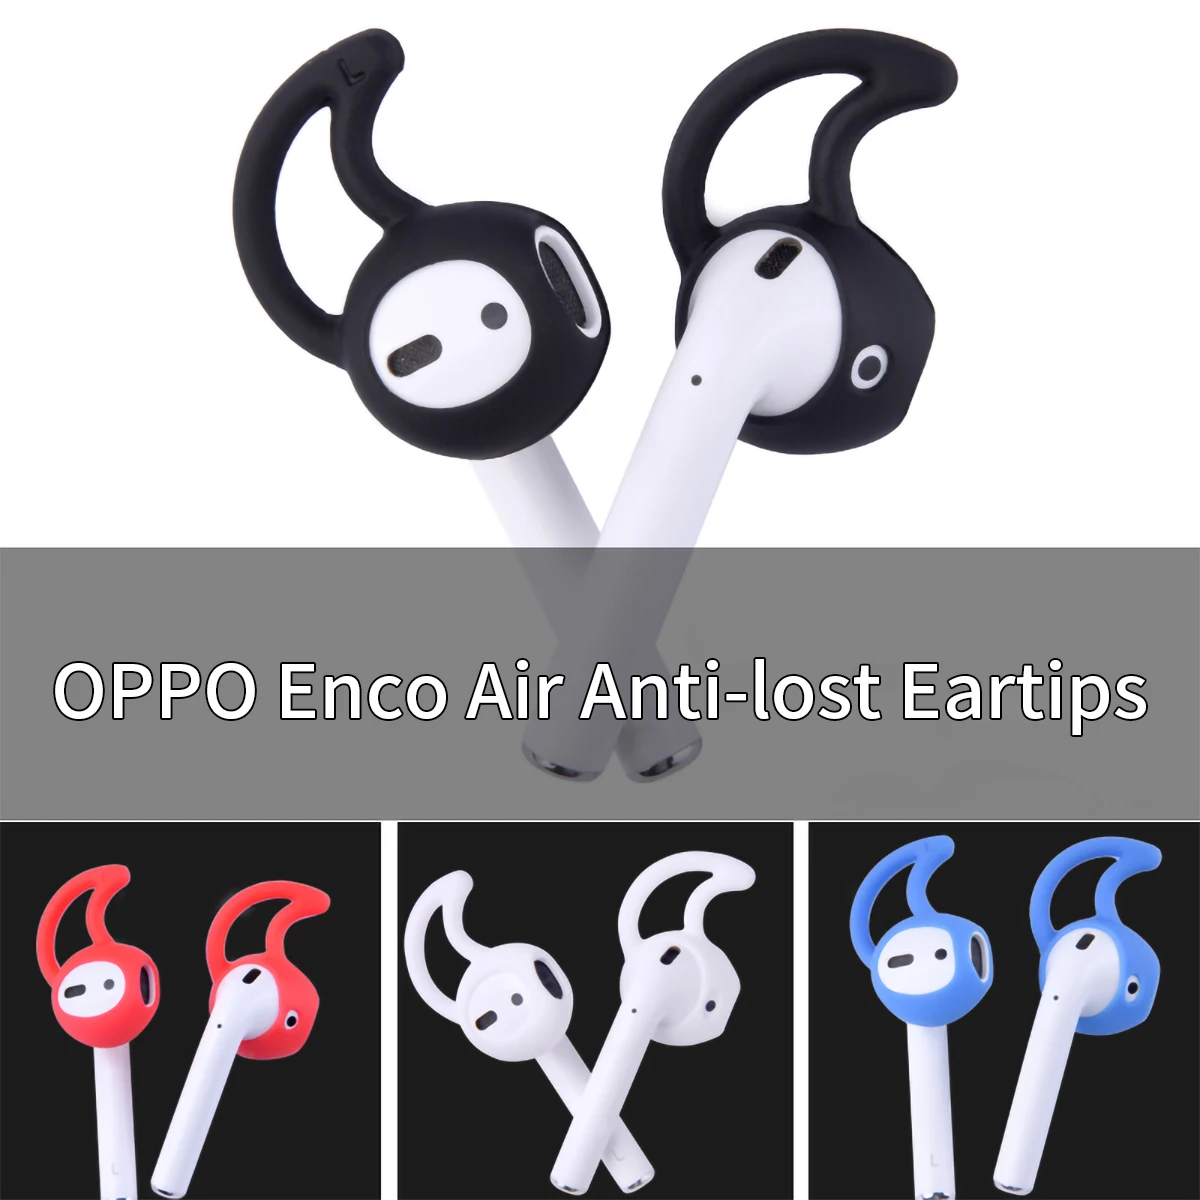 

4Pcs Silicone Ear Tips for OPPO Enco Air TWS Eartips for Apple Airpods 1/2 Tips Airplus Pro 4 Earbuds Earhook Anti-drop